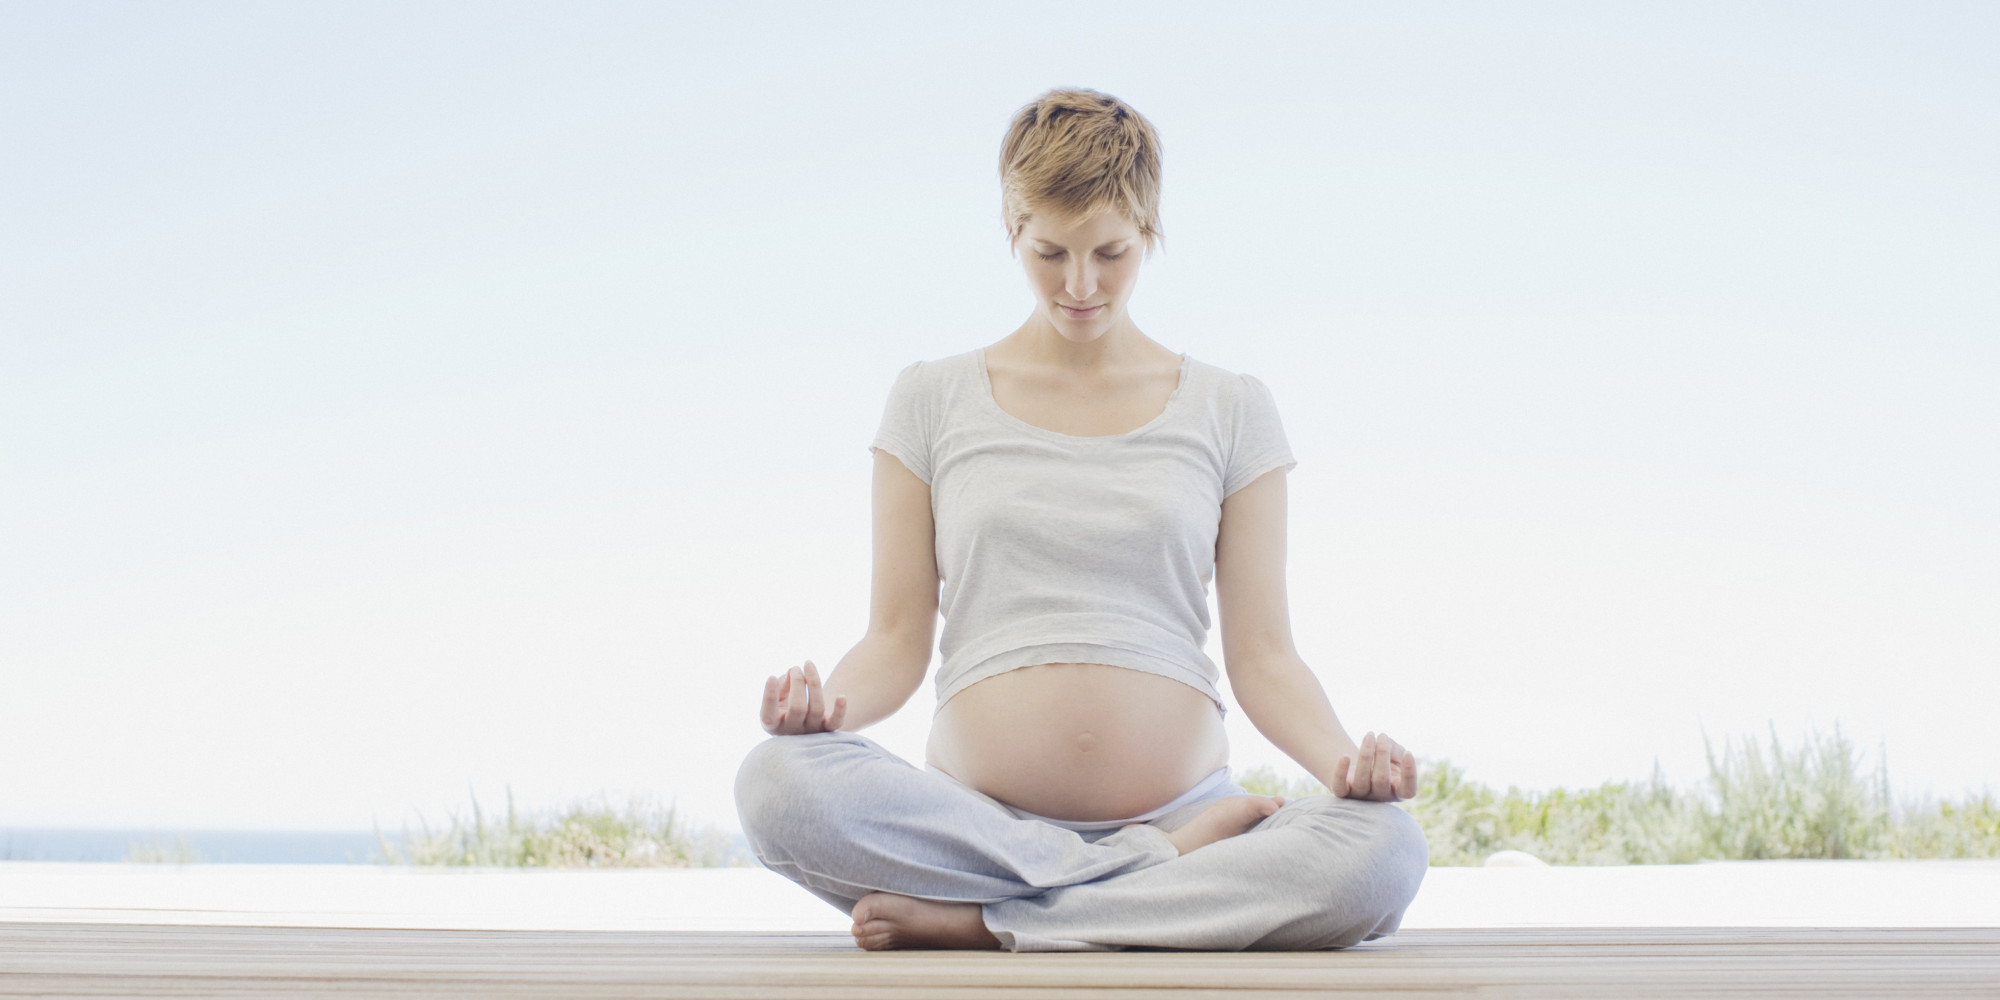 Pregnant poses Yoga Poses Know when Should Every Woman yoga pregnant